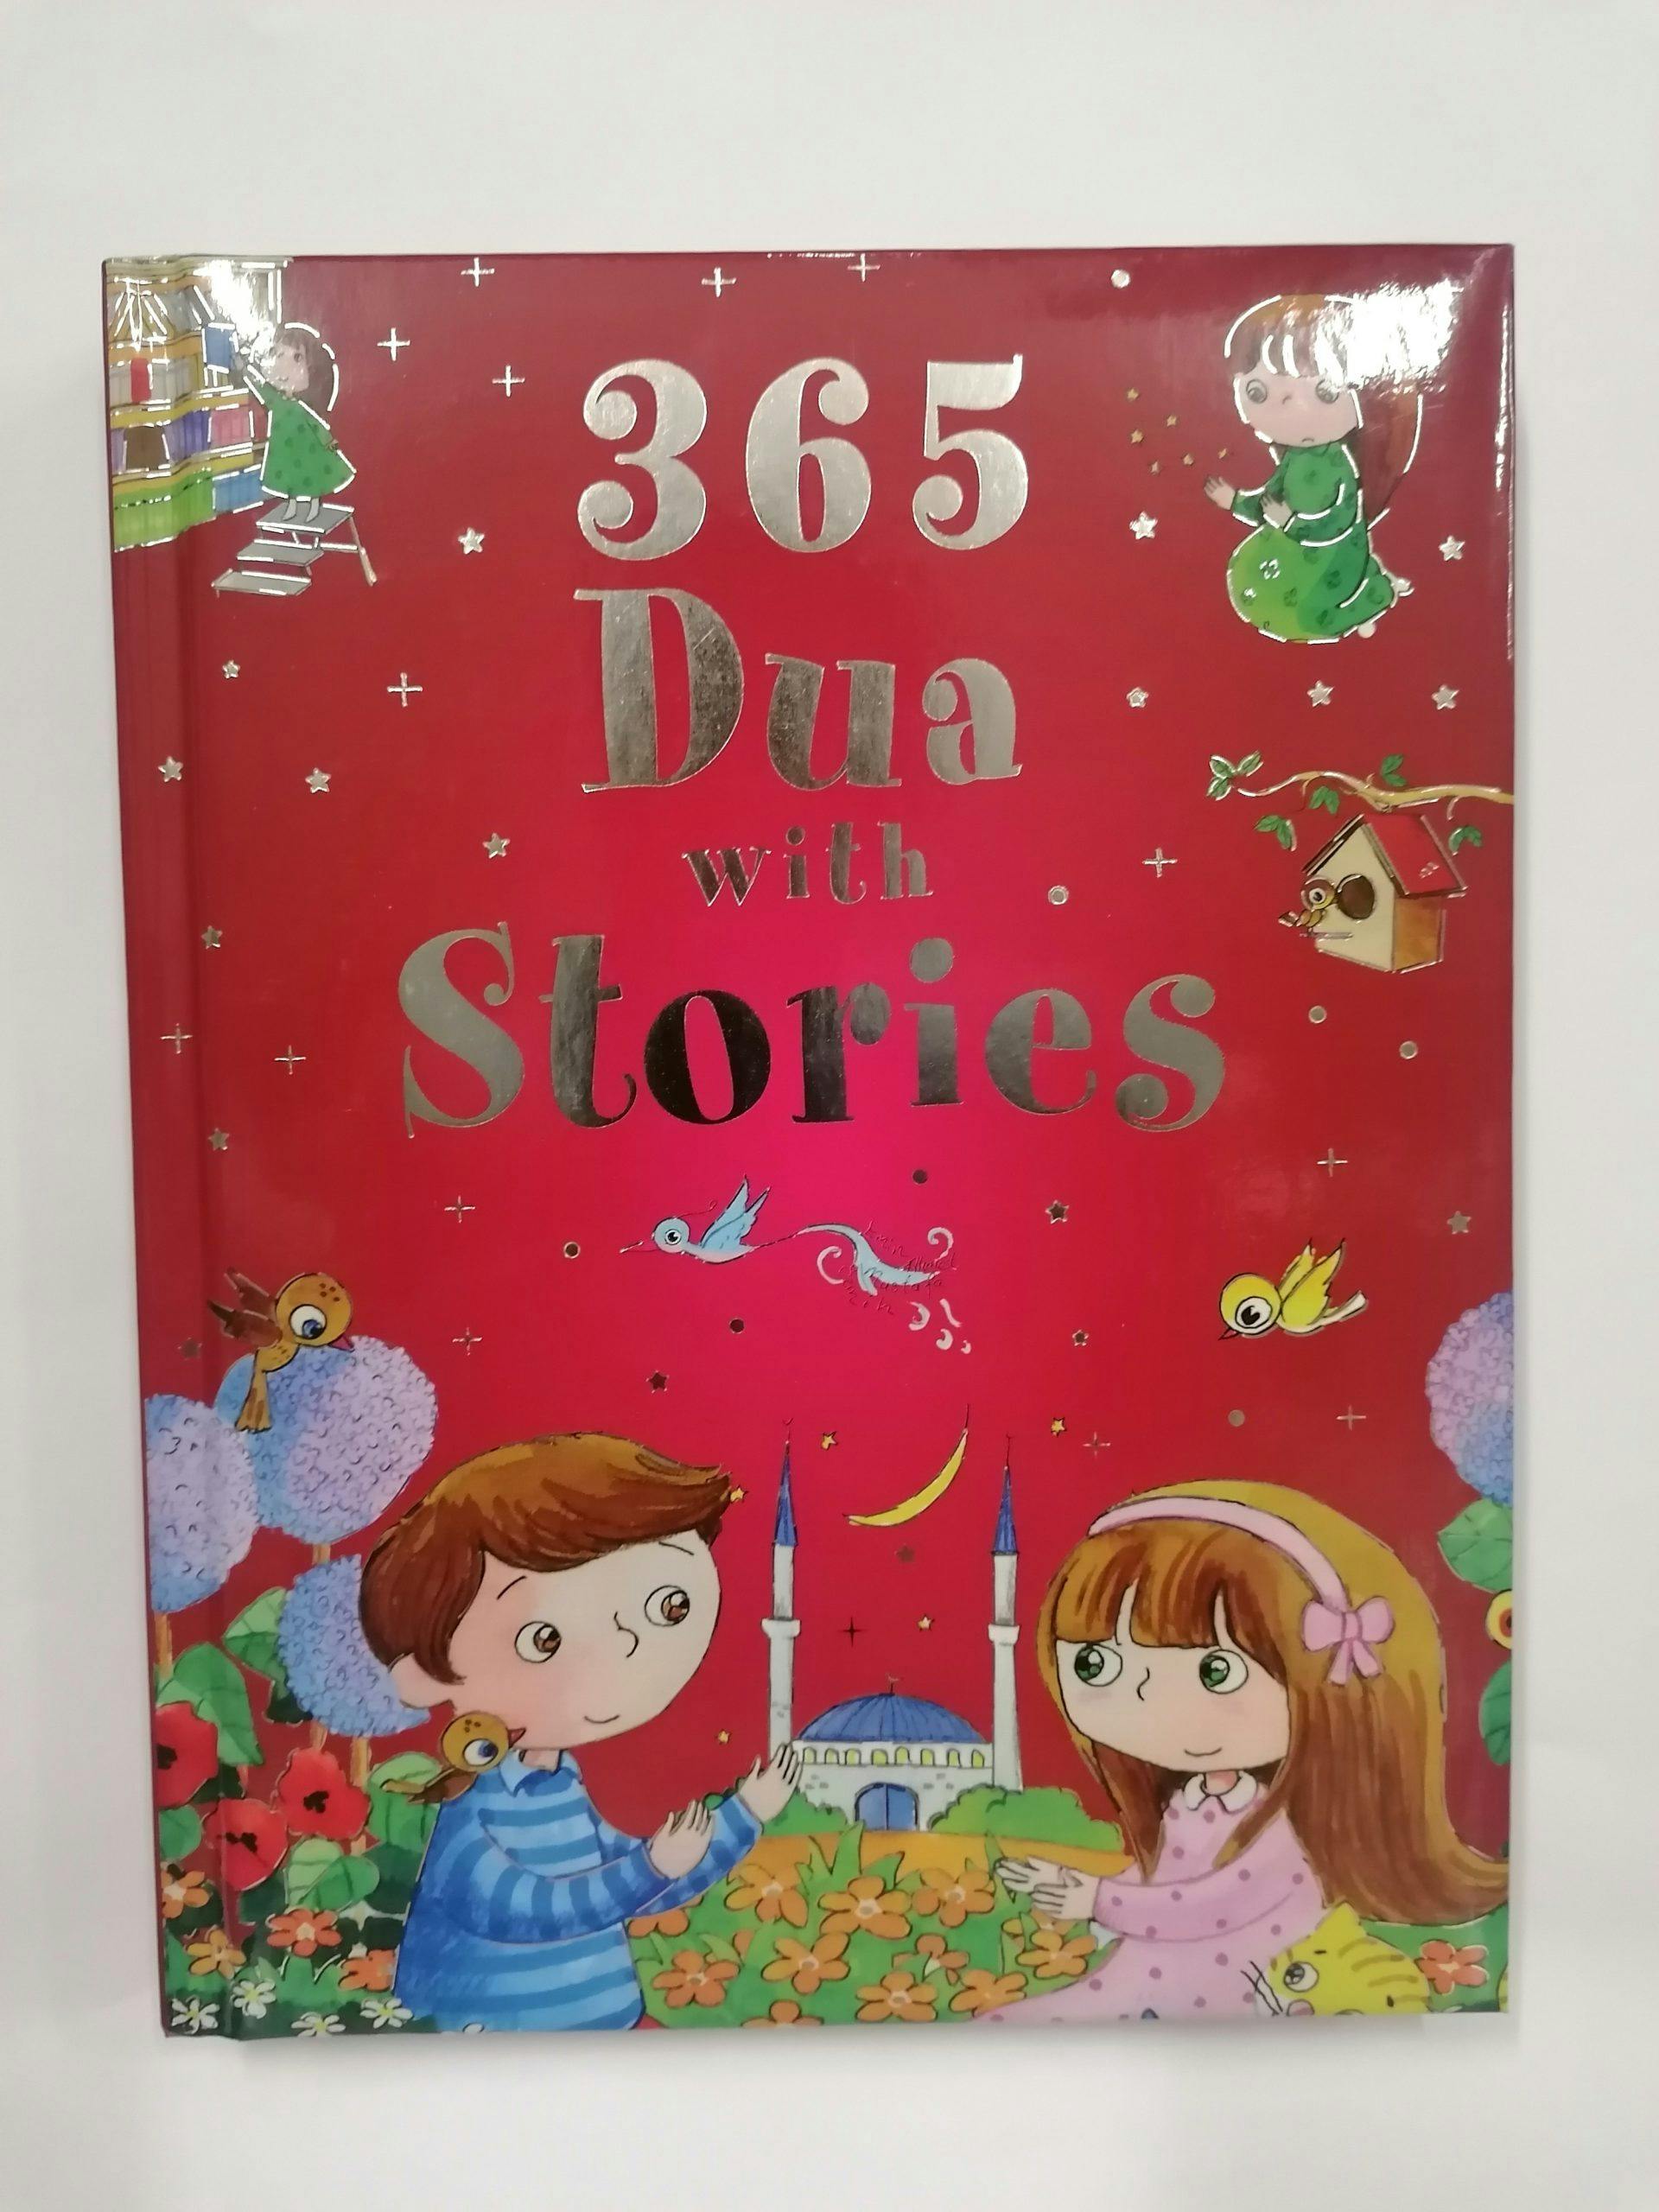 Featured image of 365 Dua With Stories